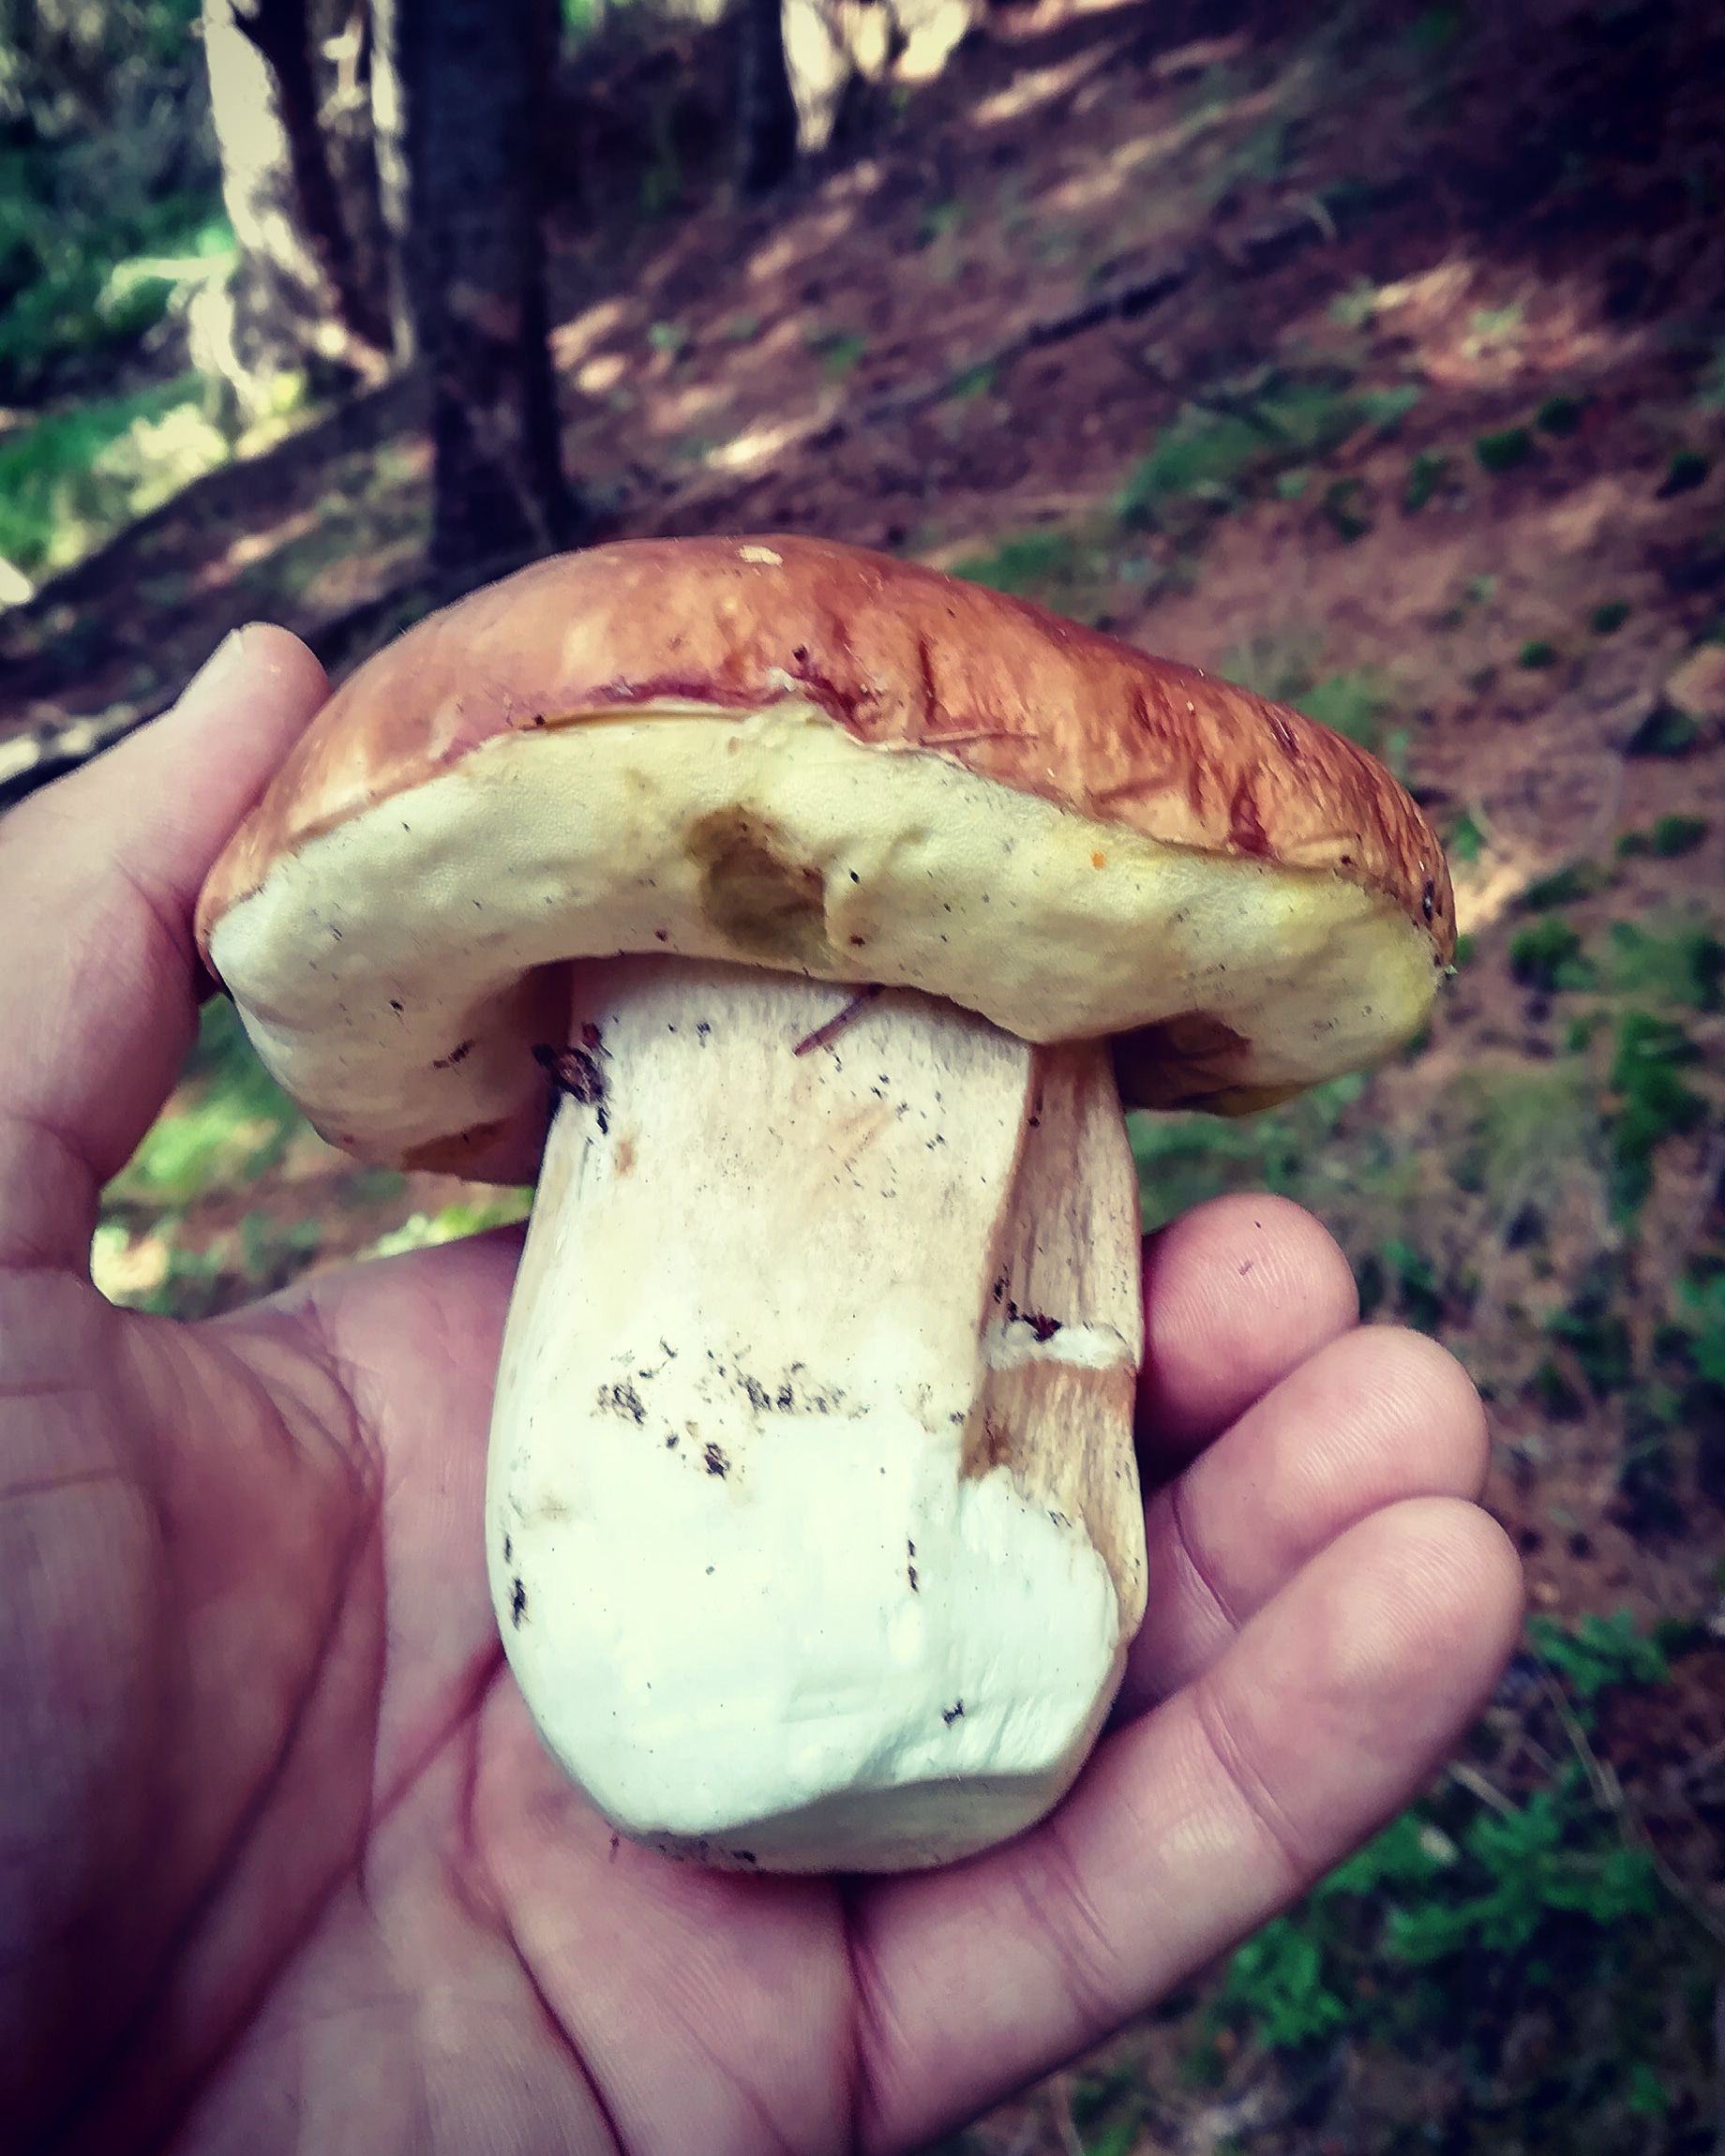 Caption: Porcini Mushroom, fresh from the wild - Hand and photo by Local Guide @ermest